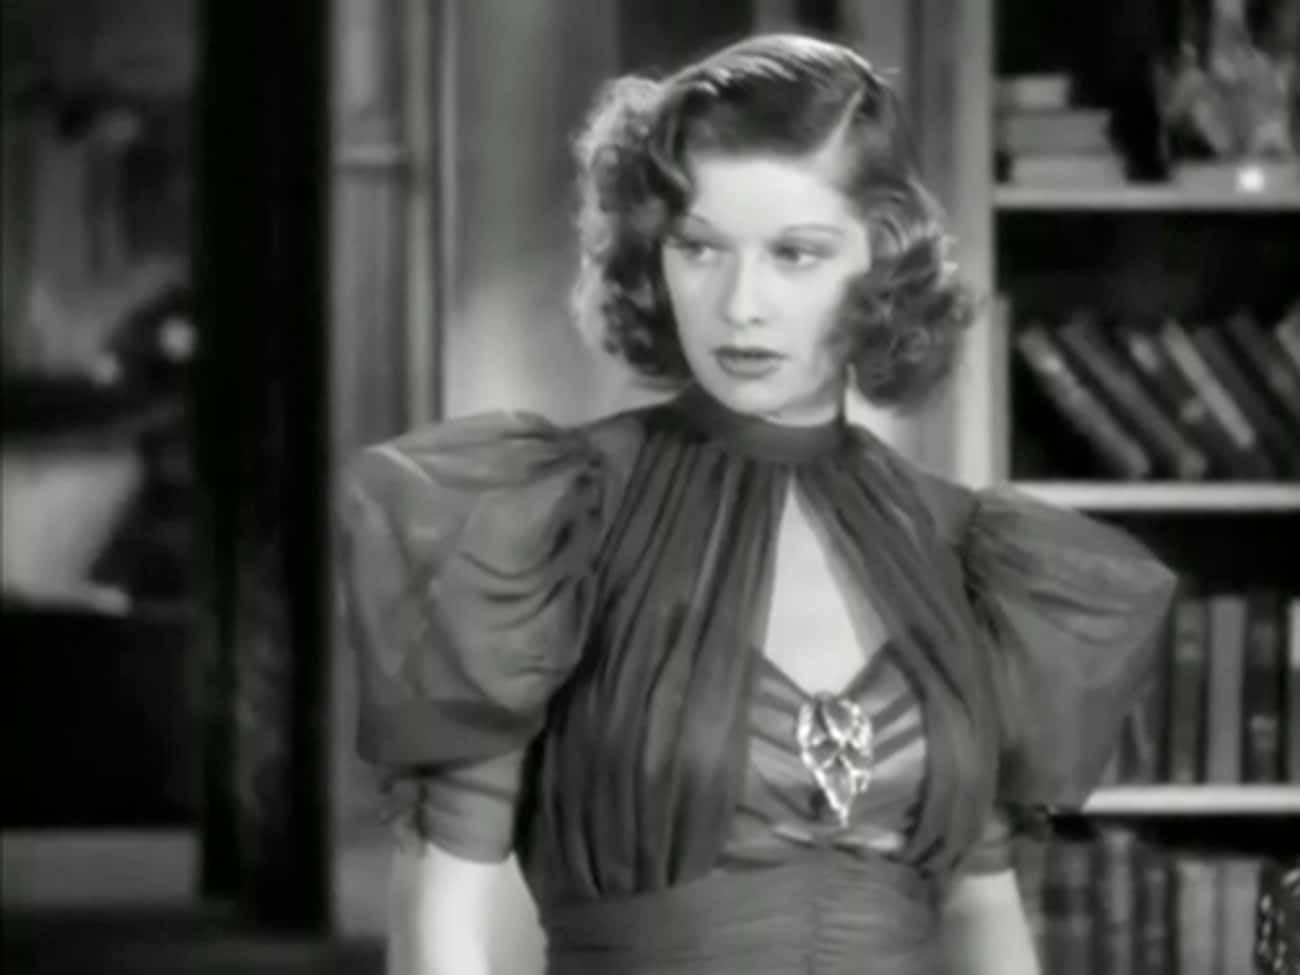 Young Lucille Ball in Gray Dress with Lace Accents